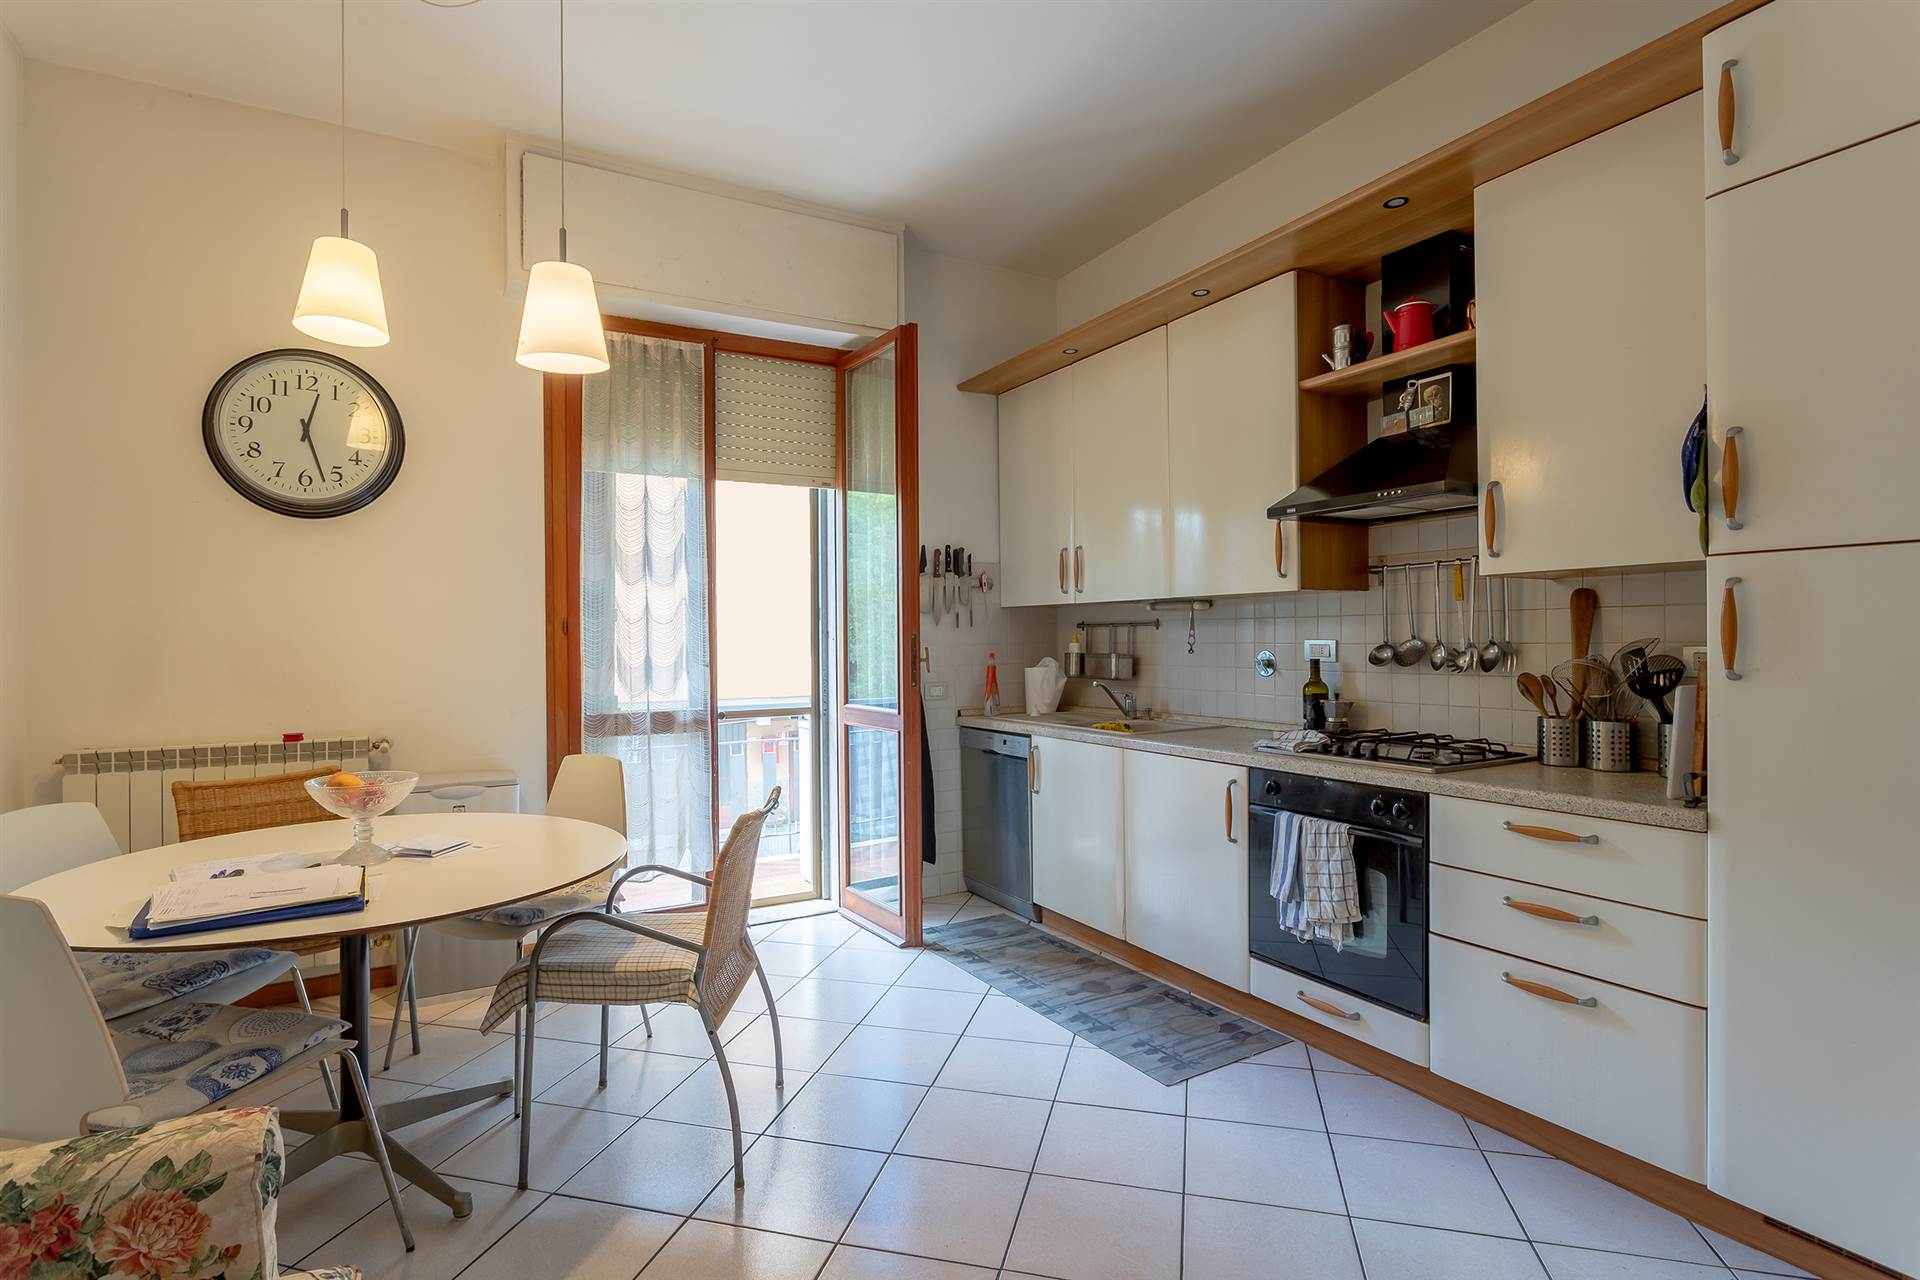 SAN MAURO A SIGNA, SIGNA, Apartment for sale of 75 Sq. mt., Good condition, Heating Individual heating system, Energetic class: G, placed at 1° on 4, 